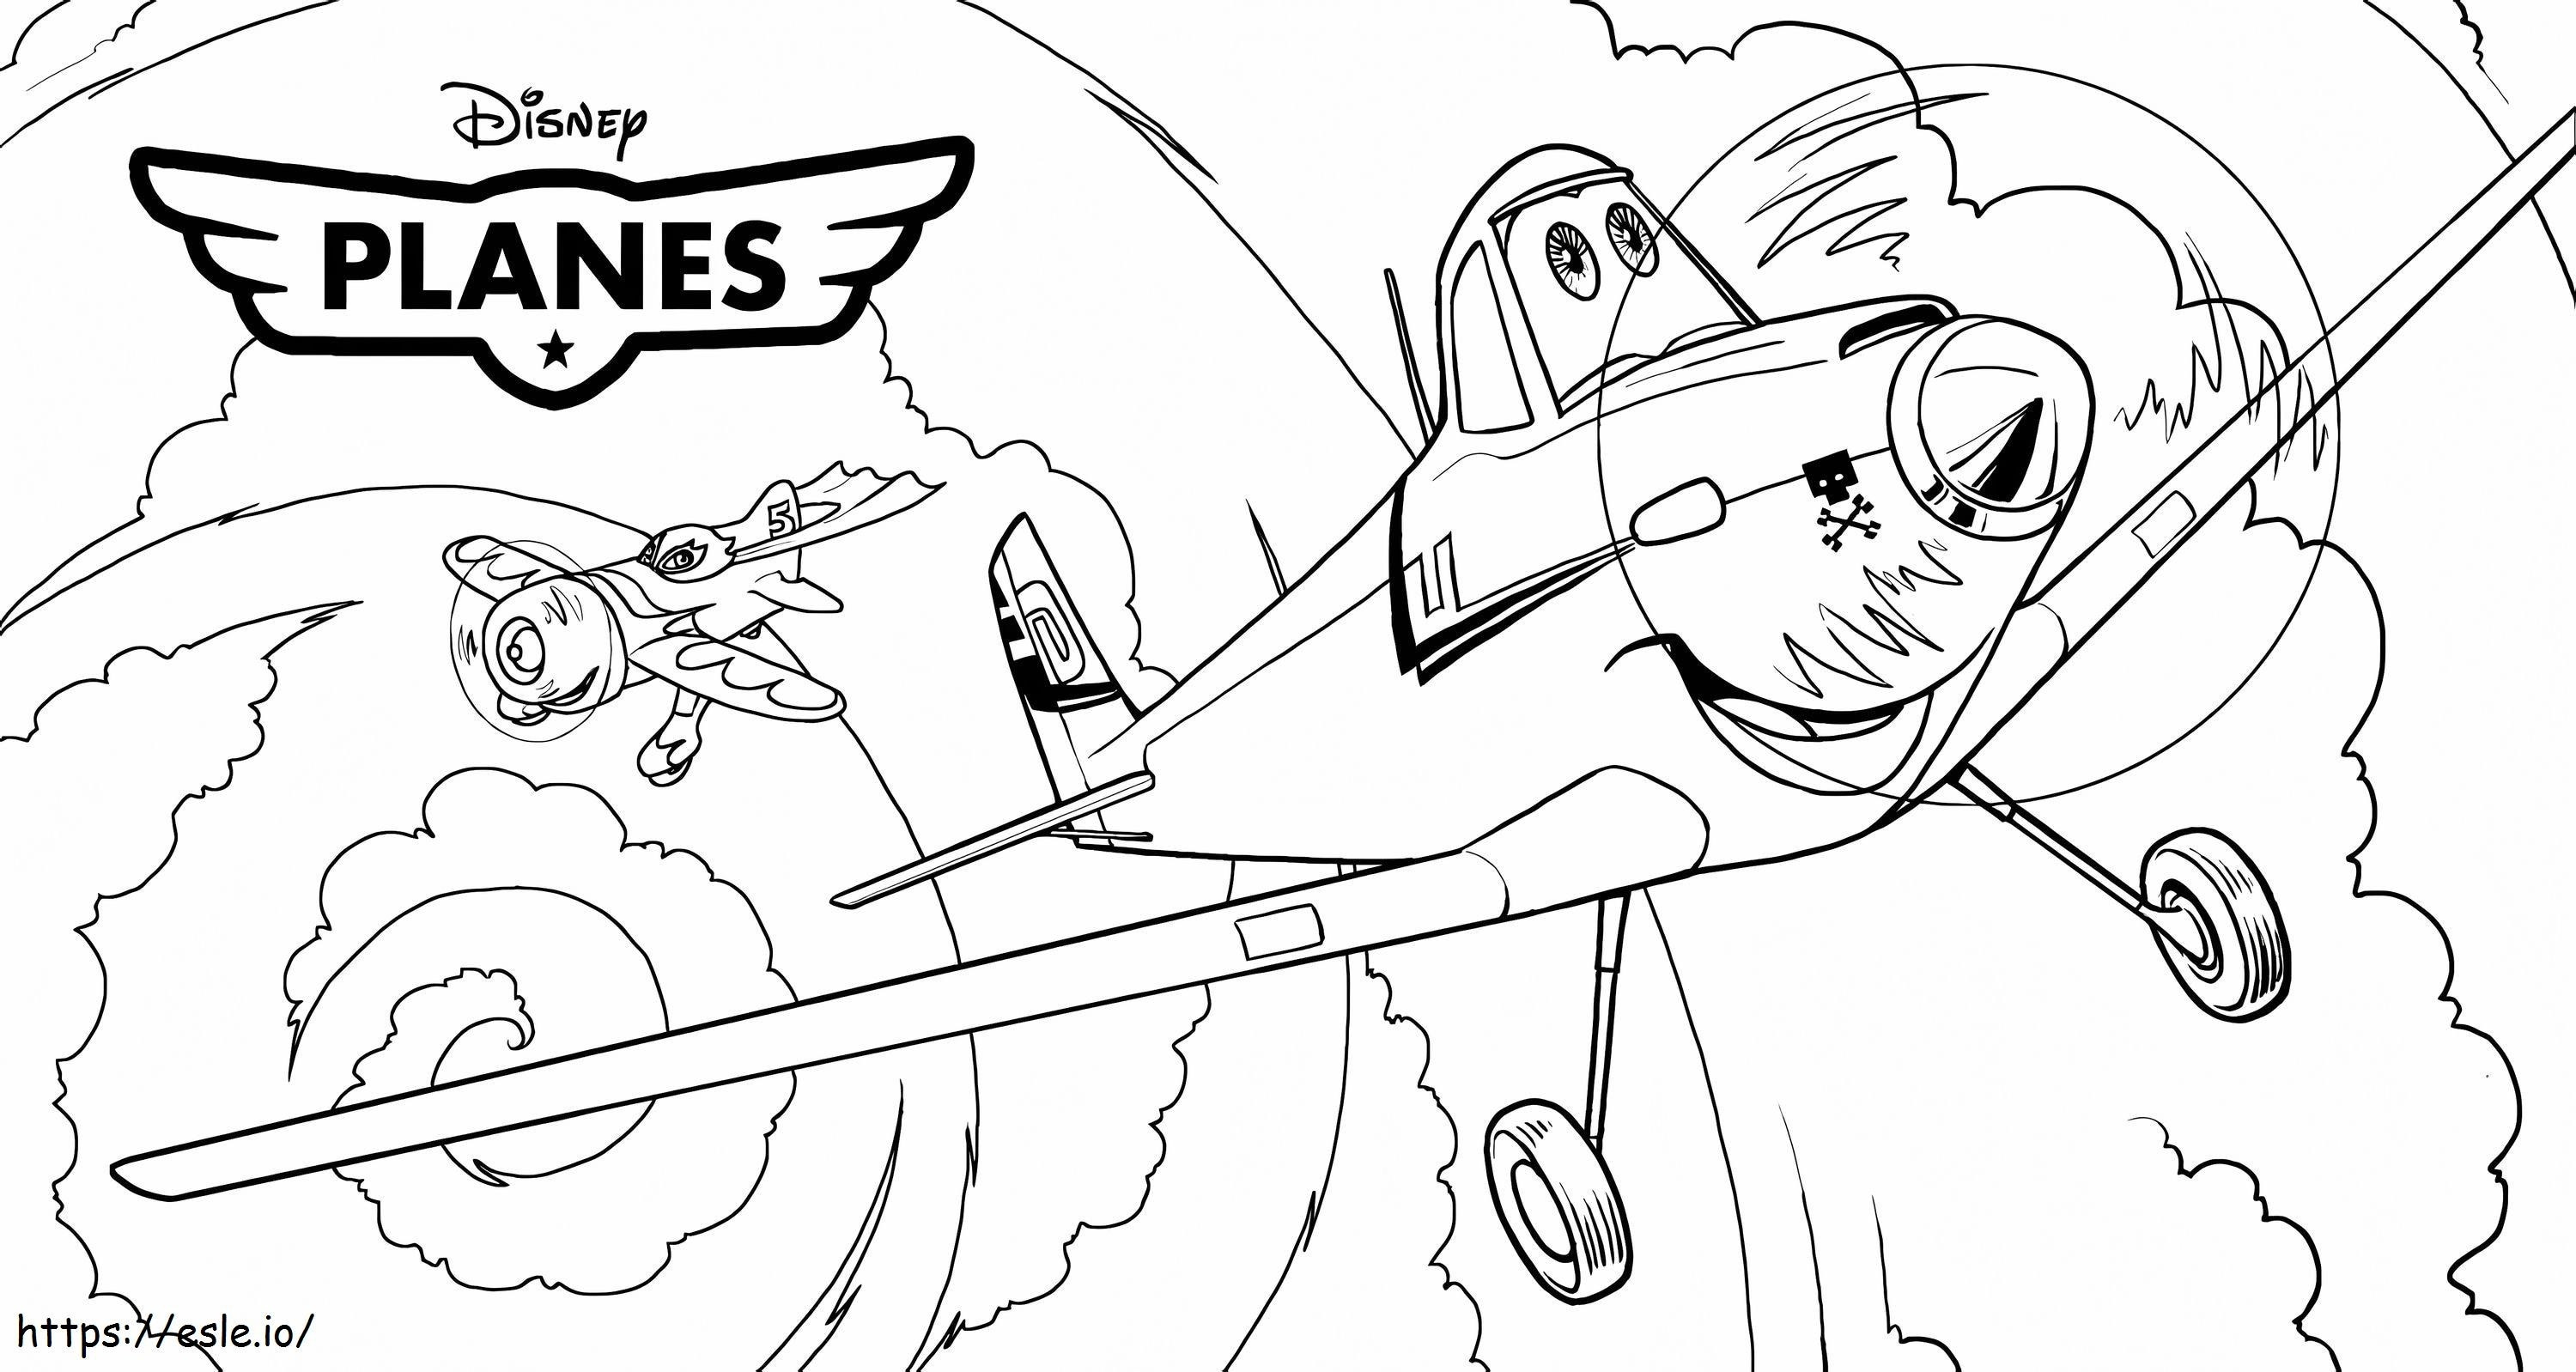 Funny Planes coloring page